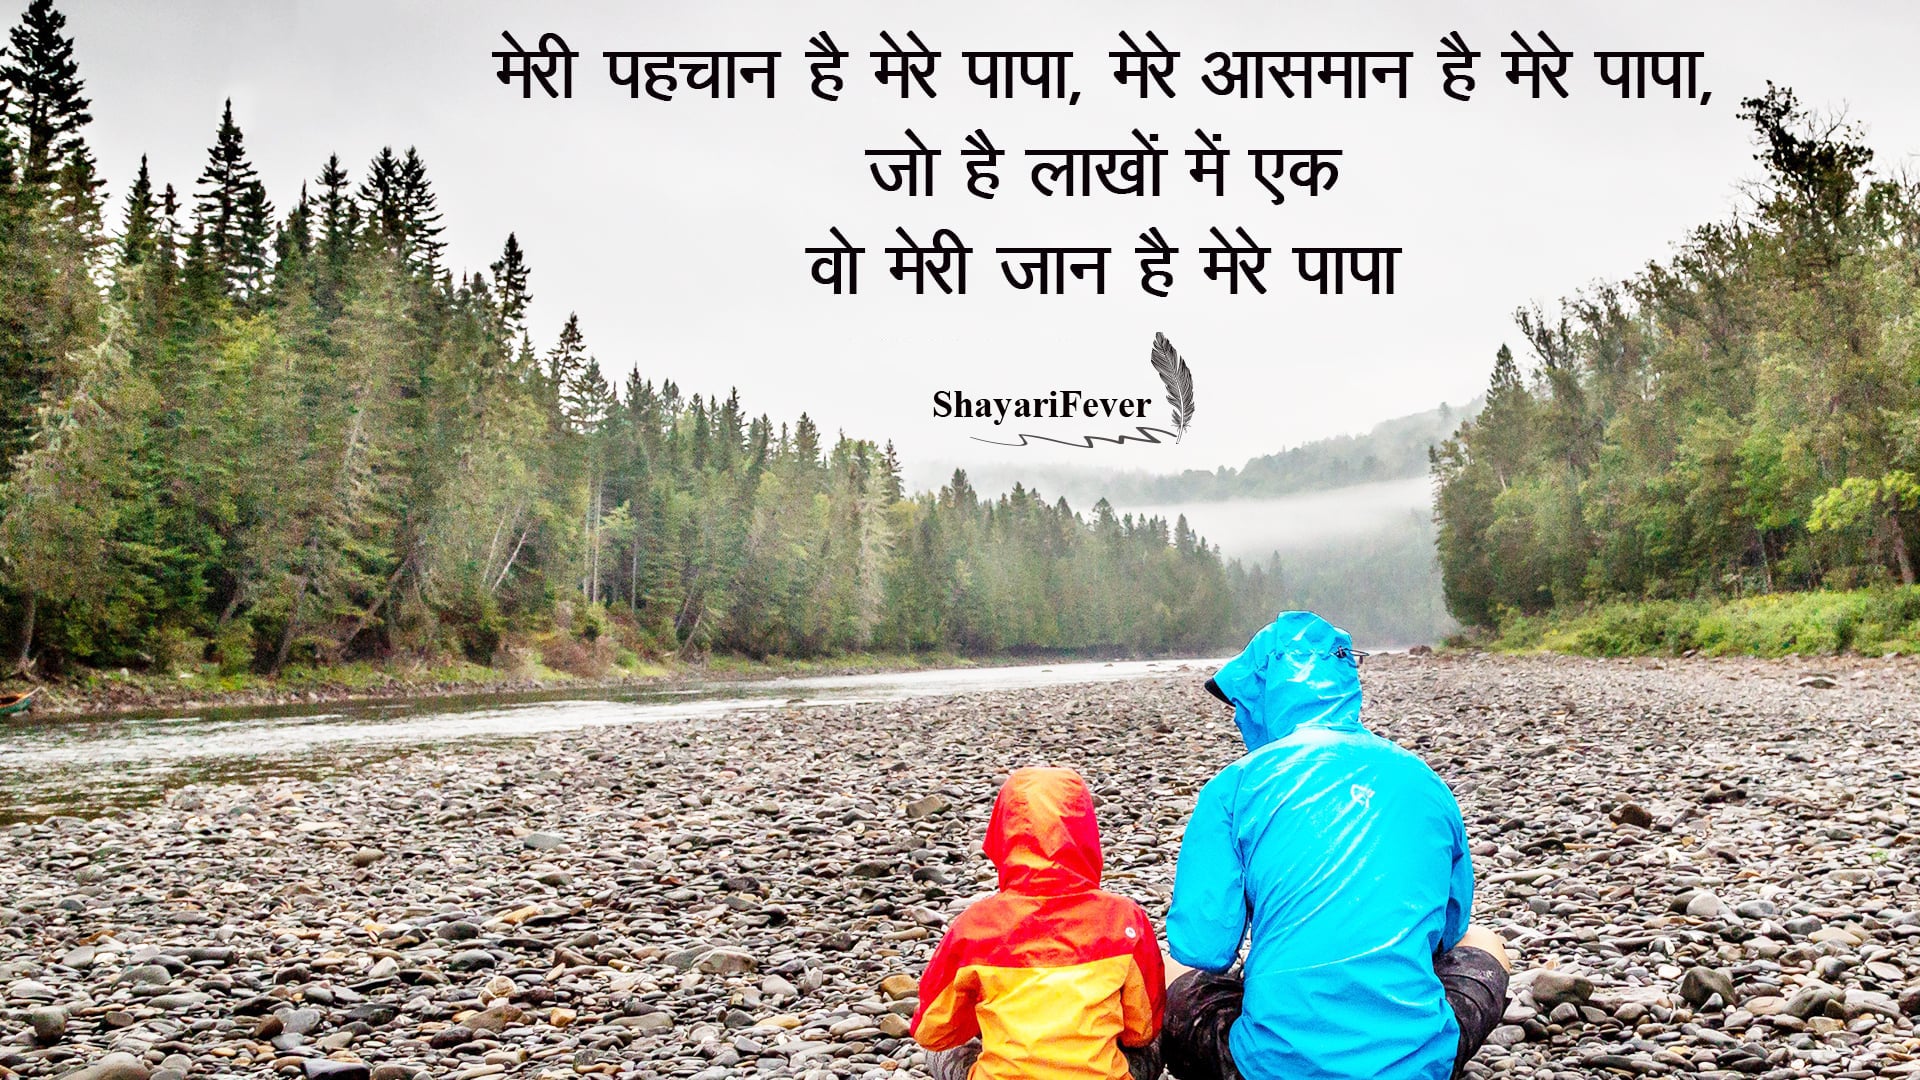 father and daughter image with quote hindi